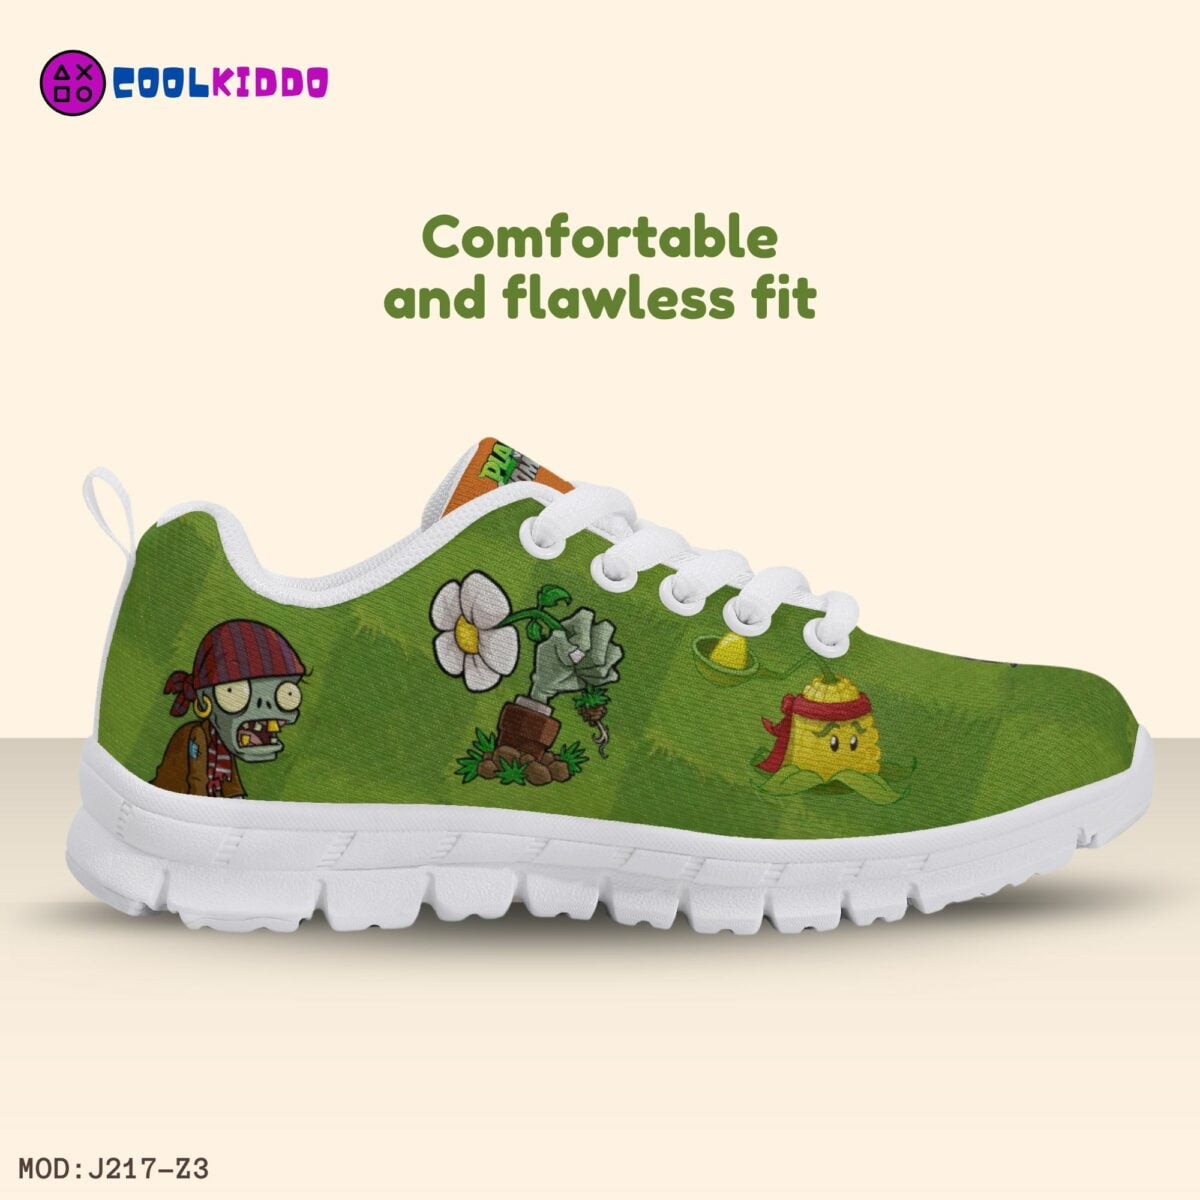 Personalized Plants vs Zombies Inspired Kids’ Lightweight Mesh Sneakers Cool Kiddo 16